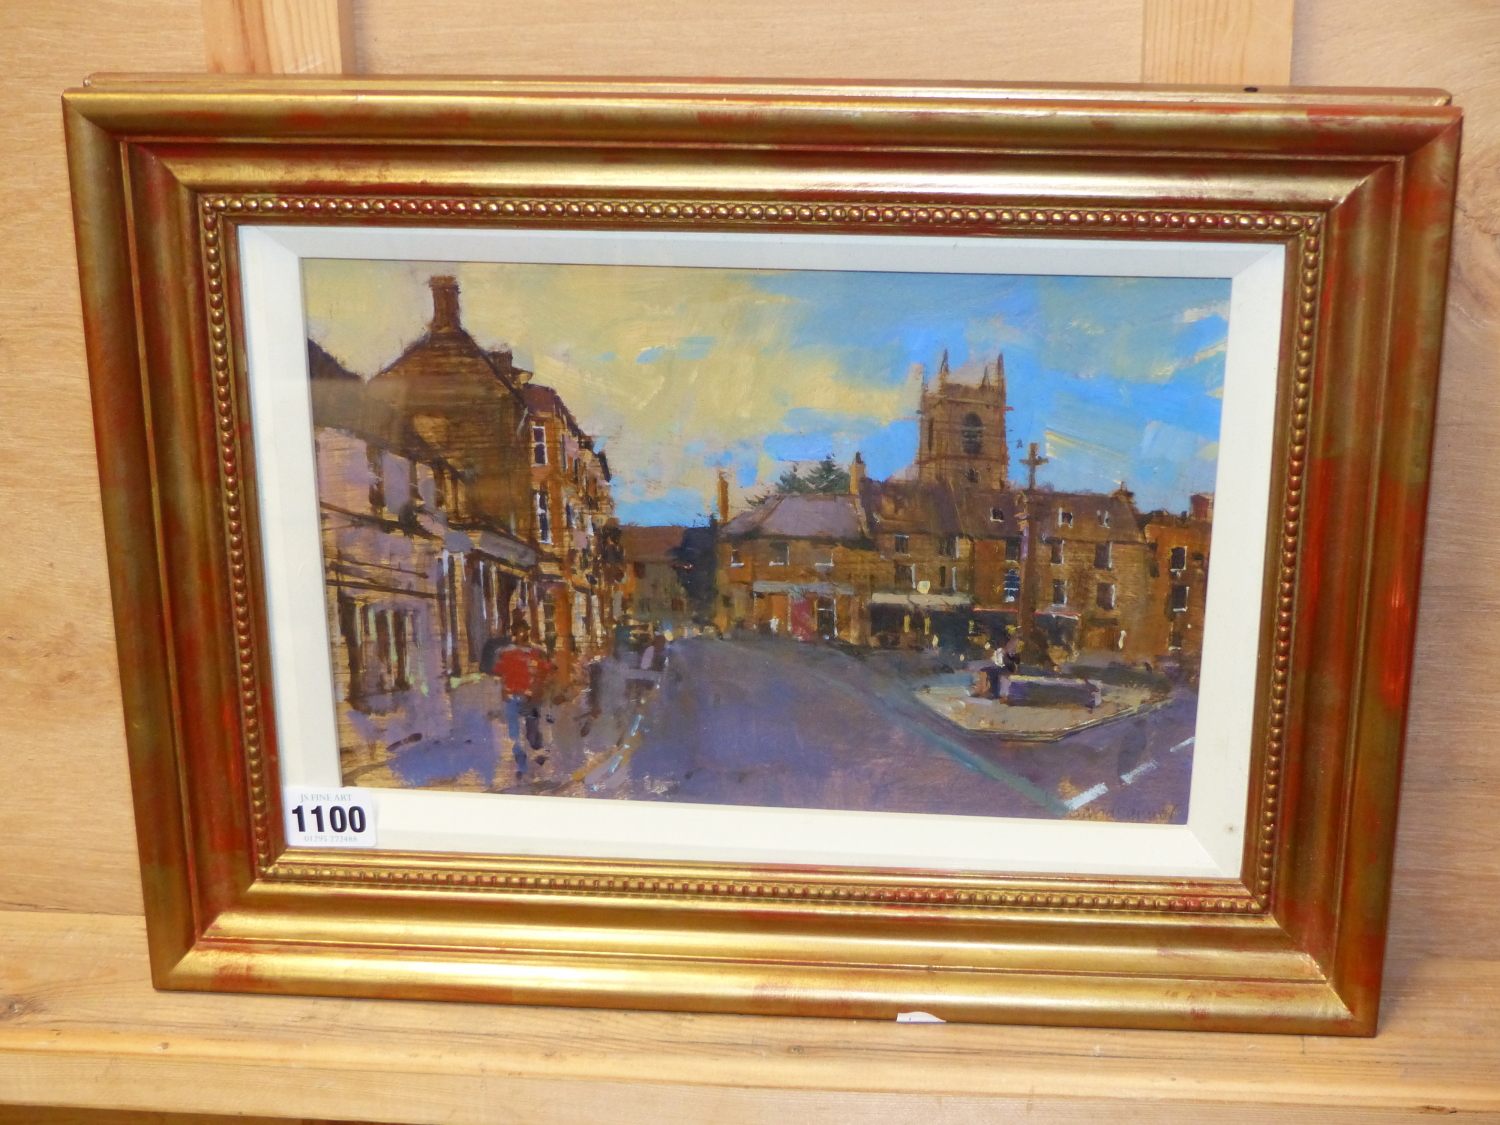 DAVID SAWYER. )1961-****) ARR. MARKET PLACE, STOW, SIGNED OIL ON BOARD. 21 x 31cms. - Image 2 of 4